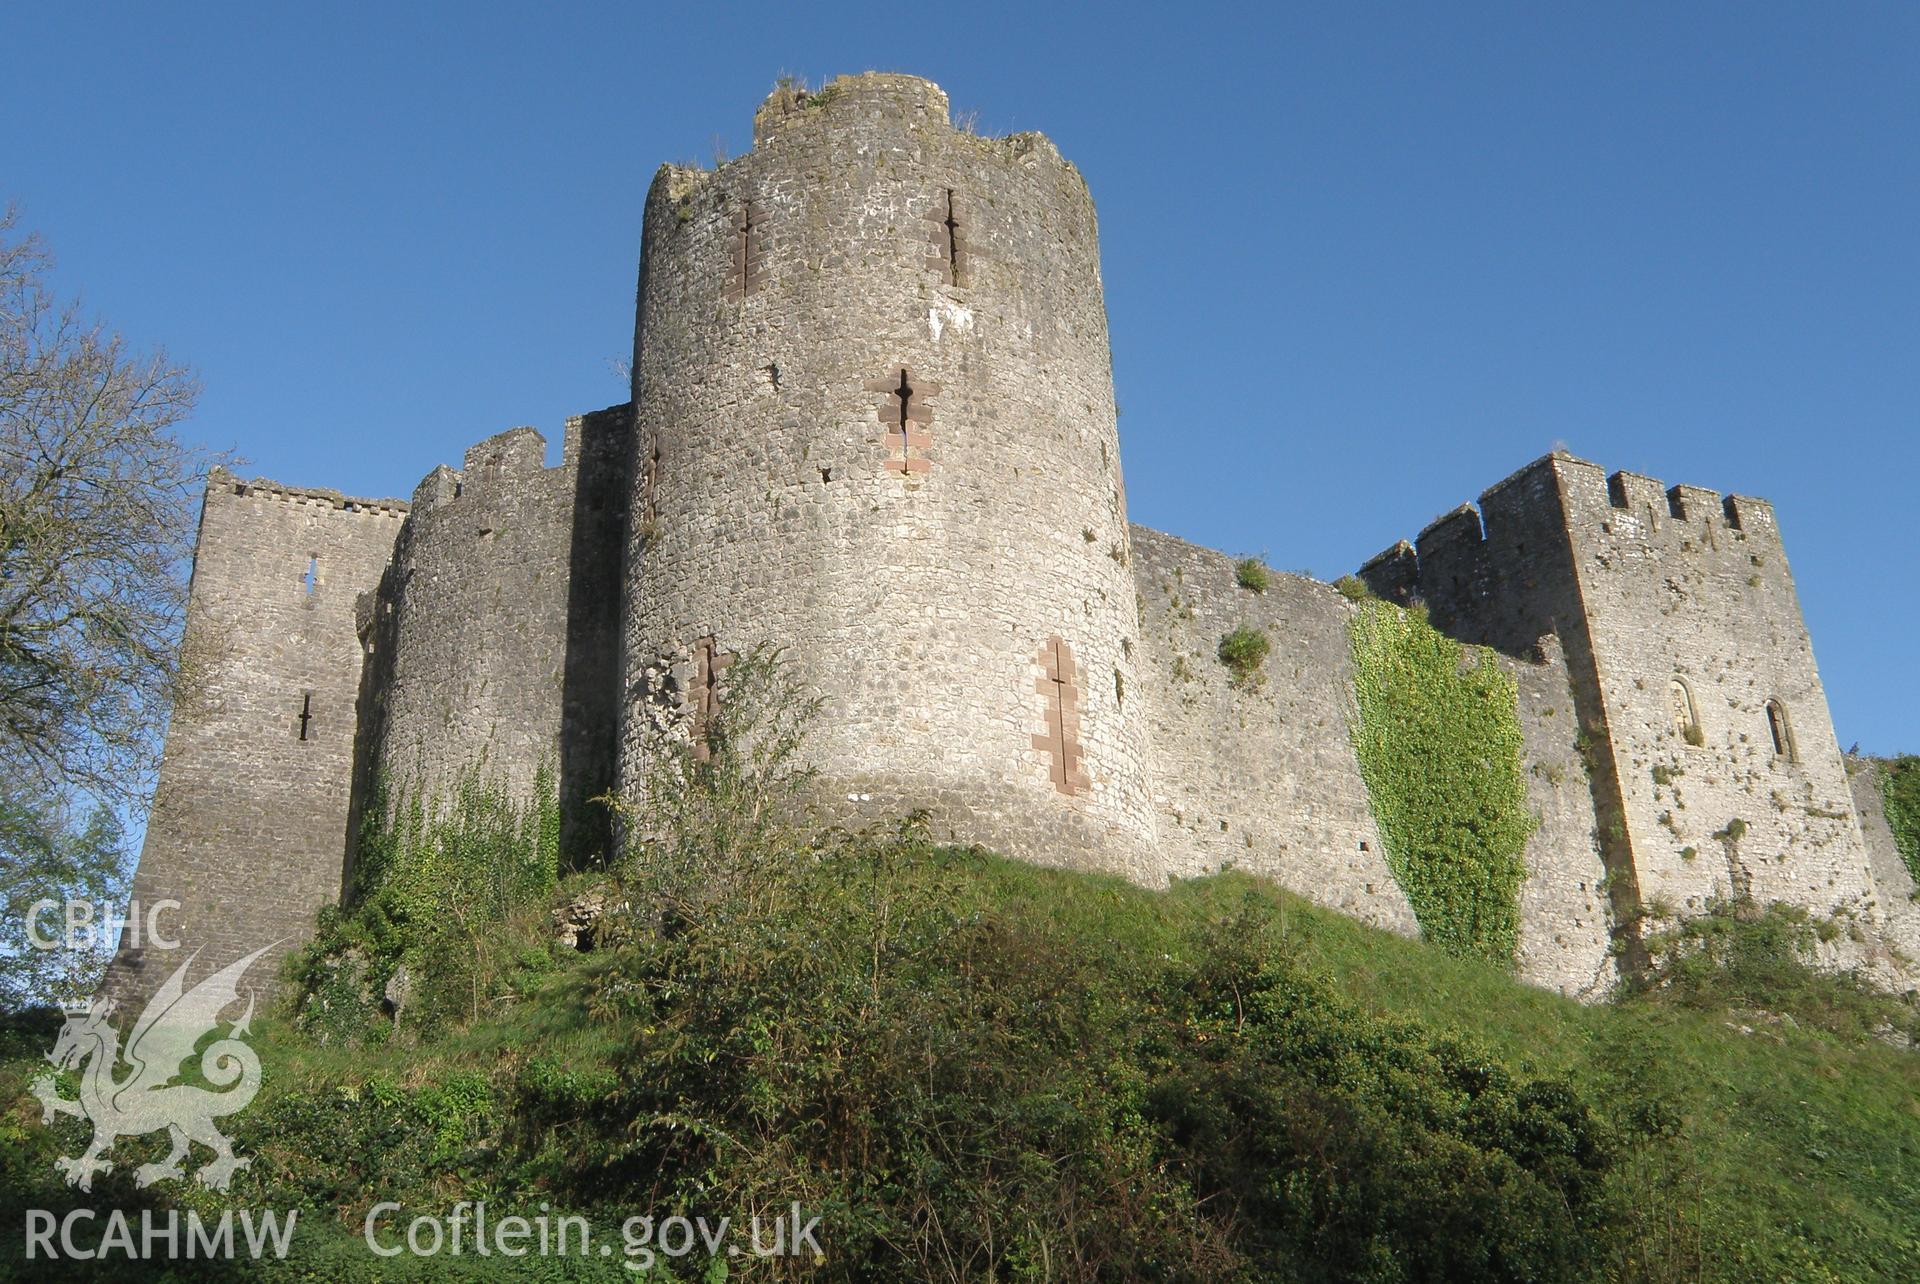 Colour photo showing Chepstow  Castle, produced by  Paul R. Davis, 7th November 2009.